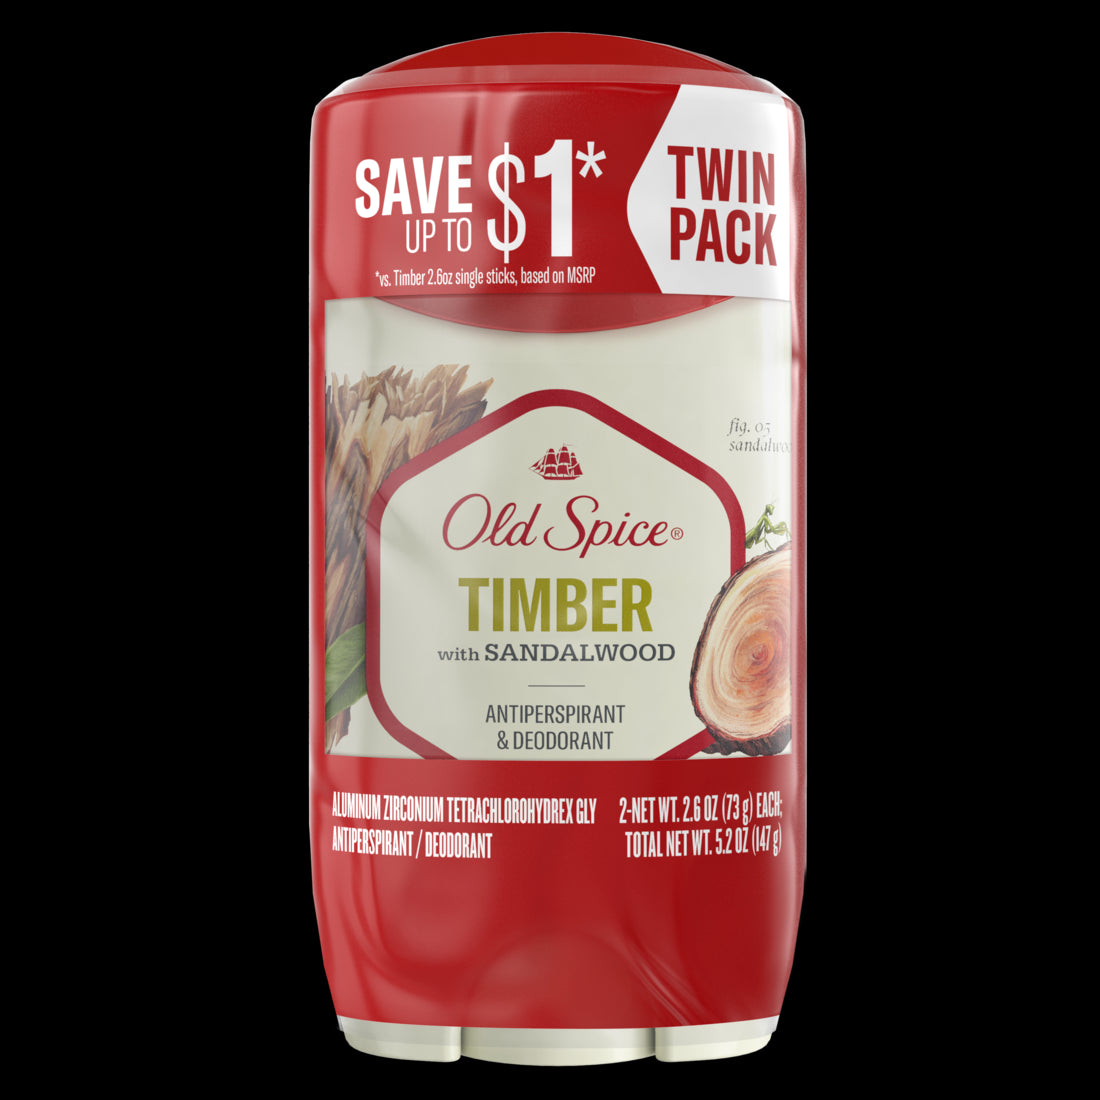 Old Spice Men's Antiperspirant & Deodorant Timber with Sandalwood Twin Pack - 2.6oz/6pk